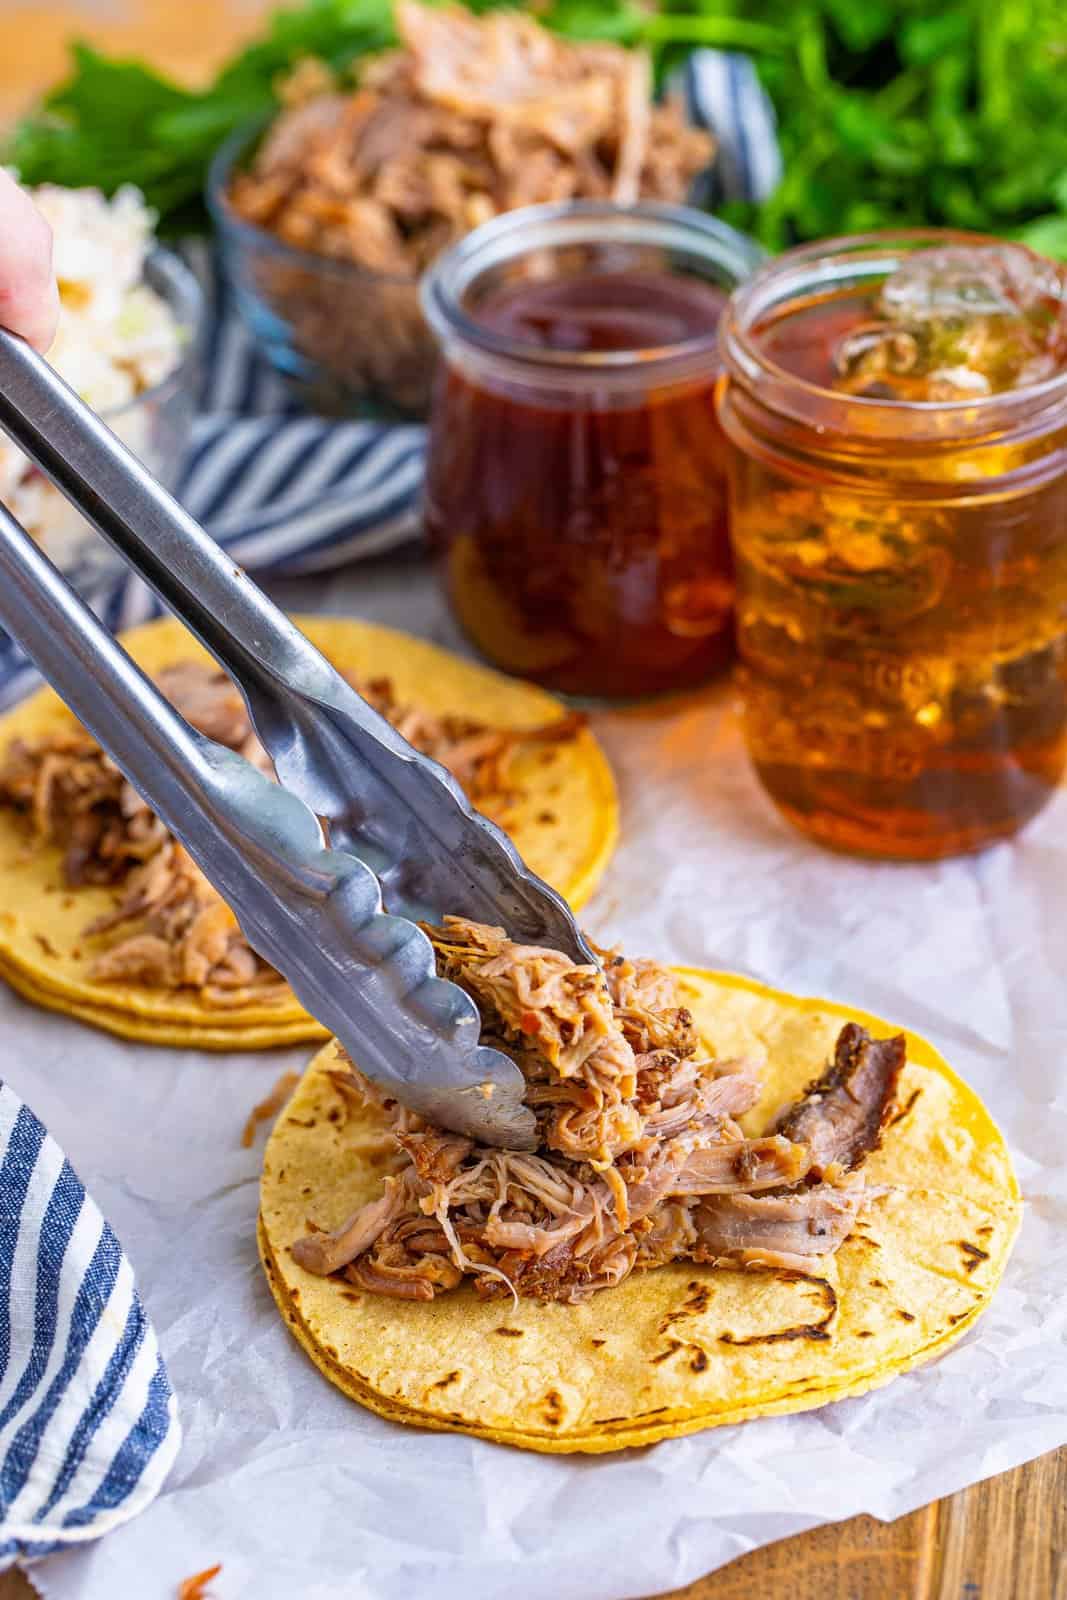 Shredded bbq pork being placed on top of corn tortillas.